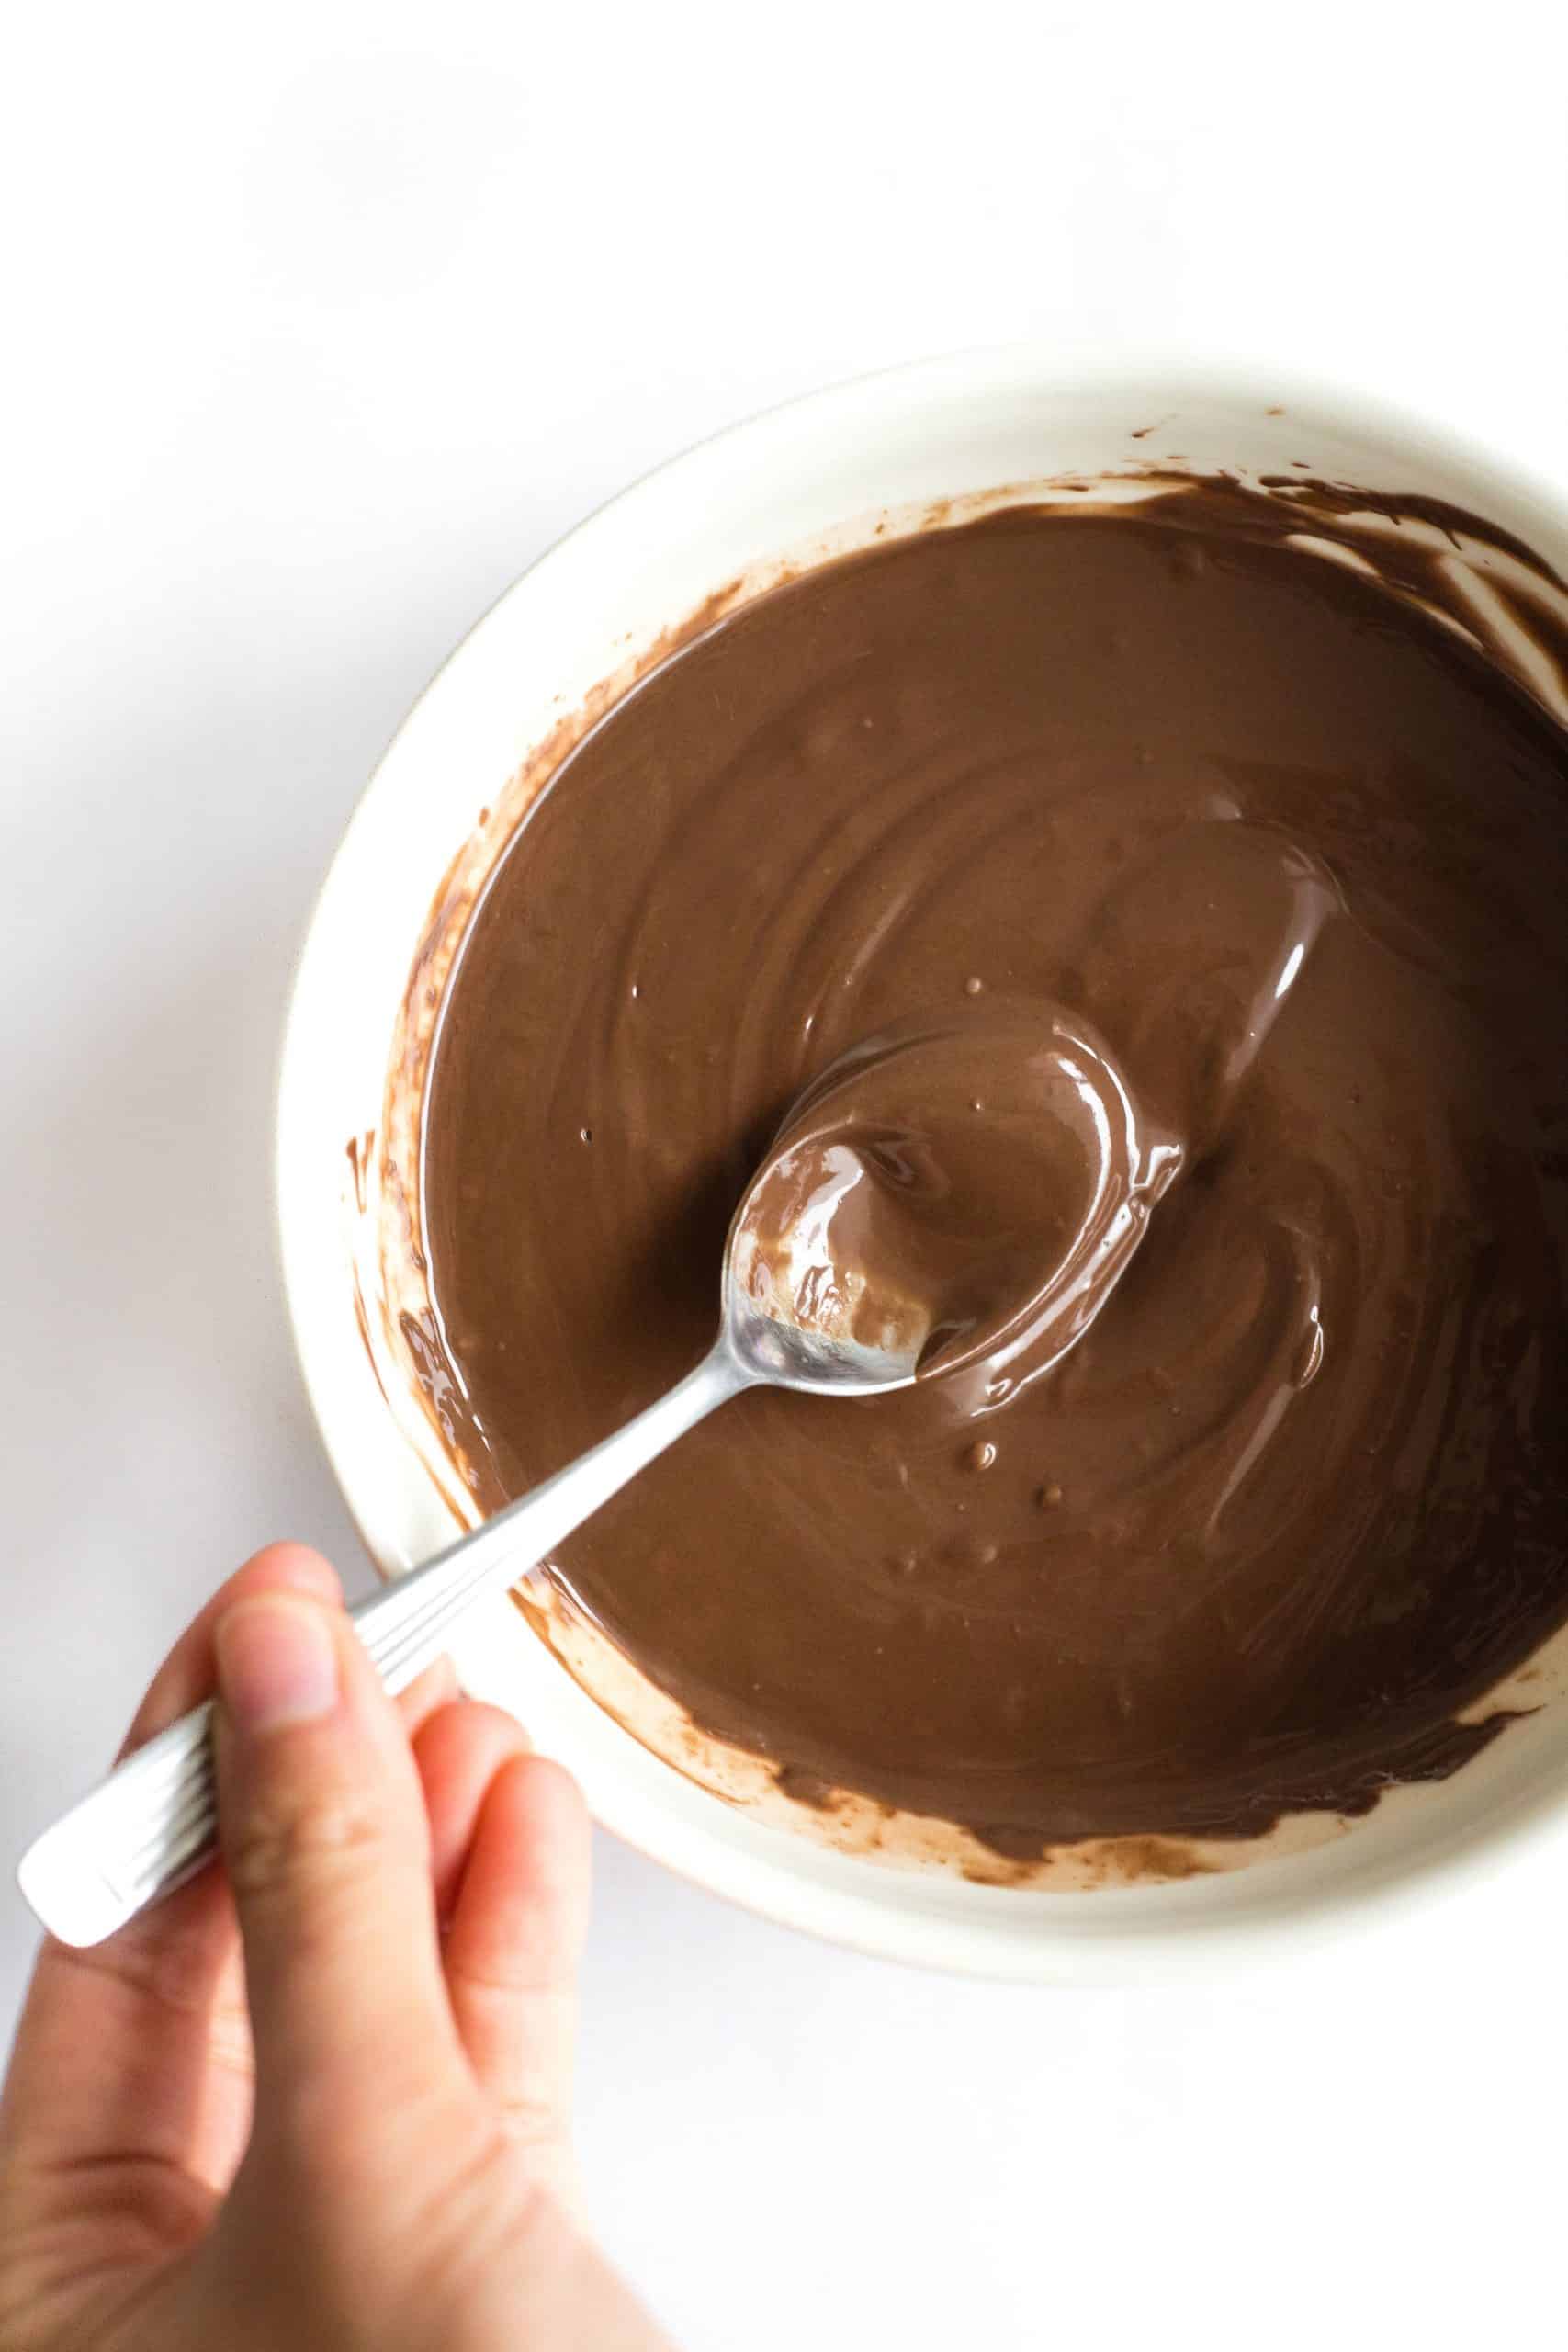 Mixing a bowl of melted chocolate.